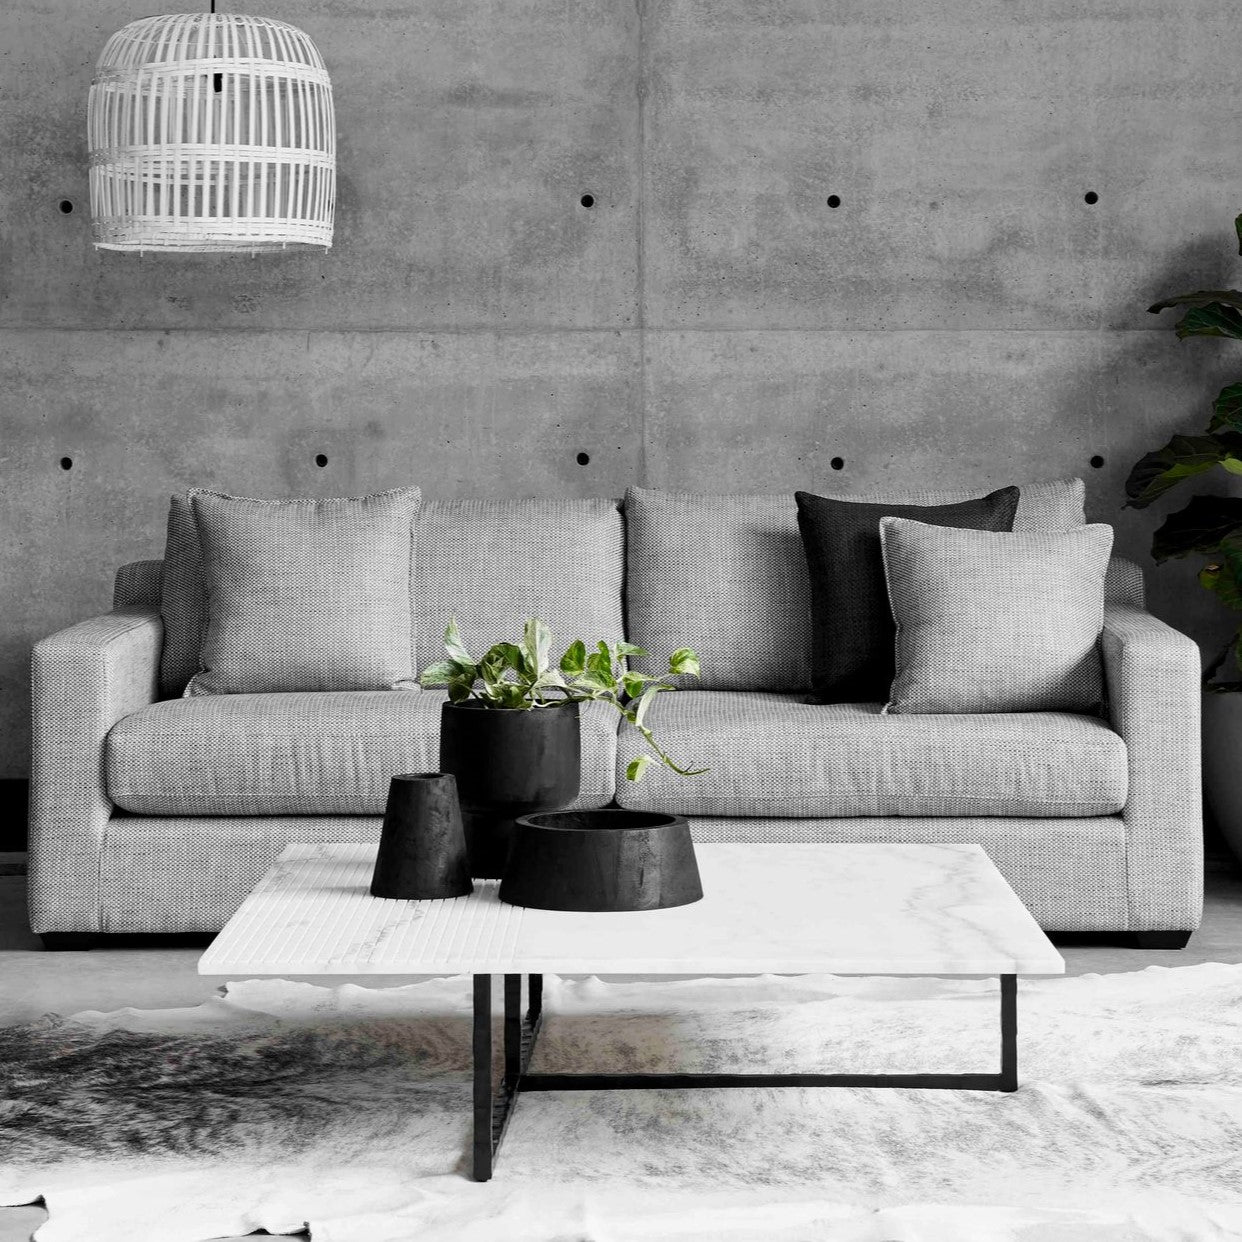 Hudson Modular Sofa by Molmic available from Make Your House A Home, Furniture Store located in Bendigo, Victoria. Australian Made in Melbourne.